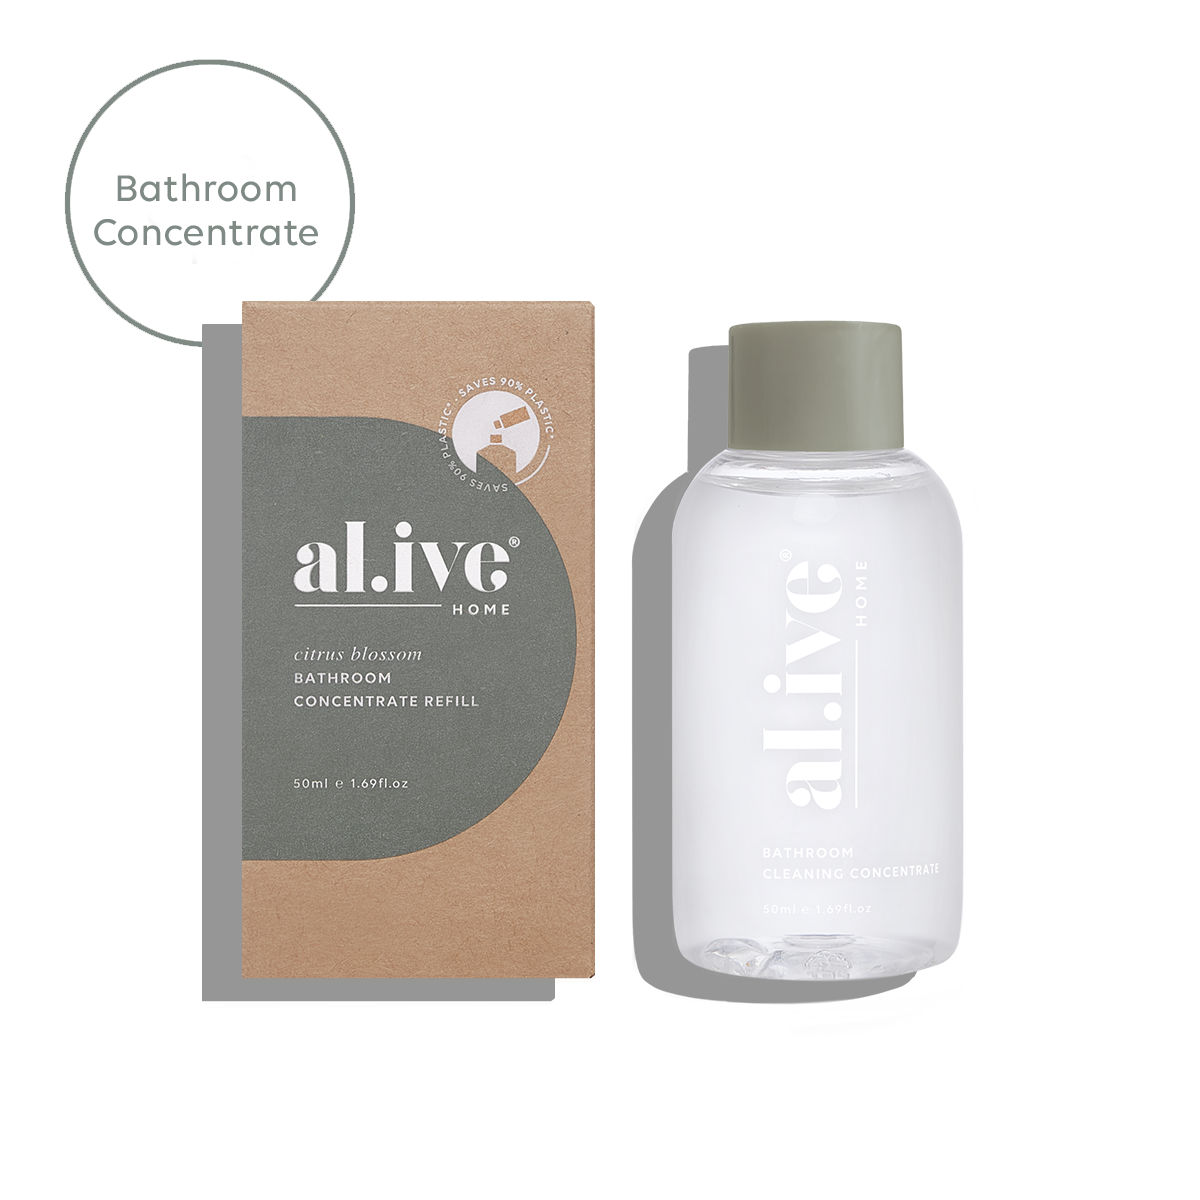 Al.ive Home Cleaning - Bathroom (Citrus Blossom) Refill 50ml conentrate